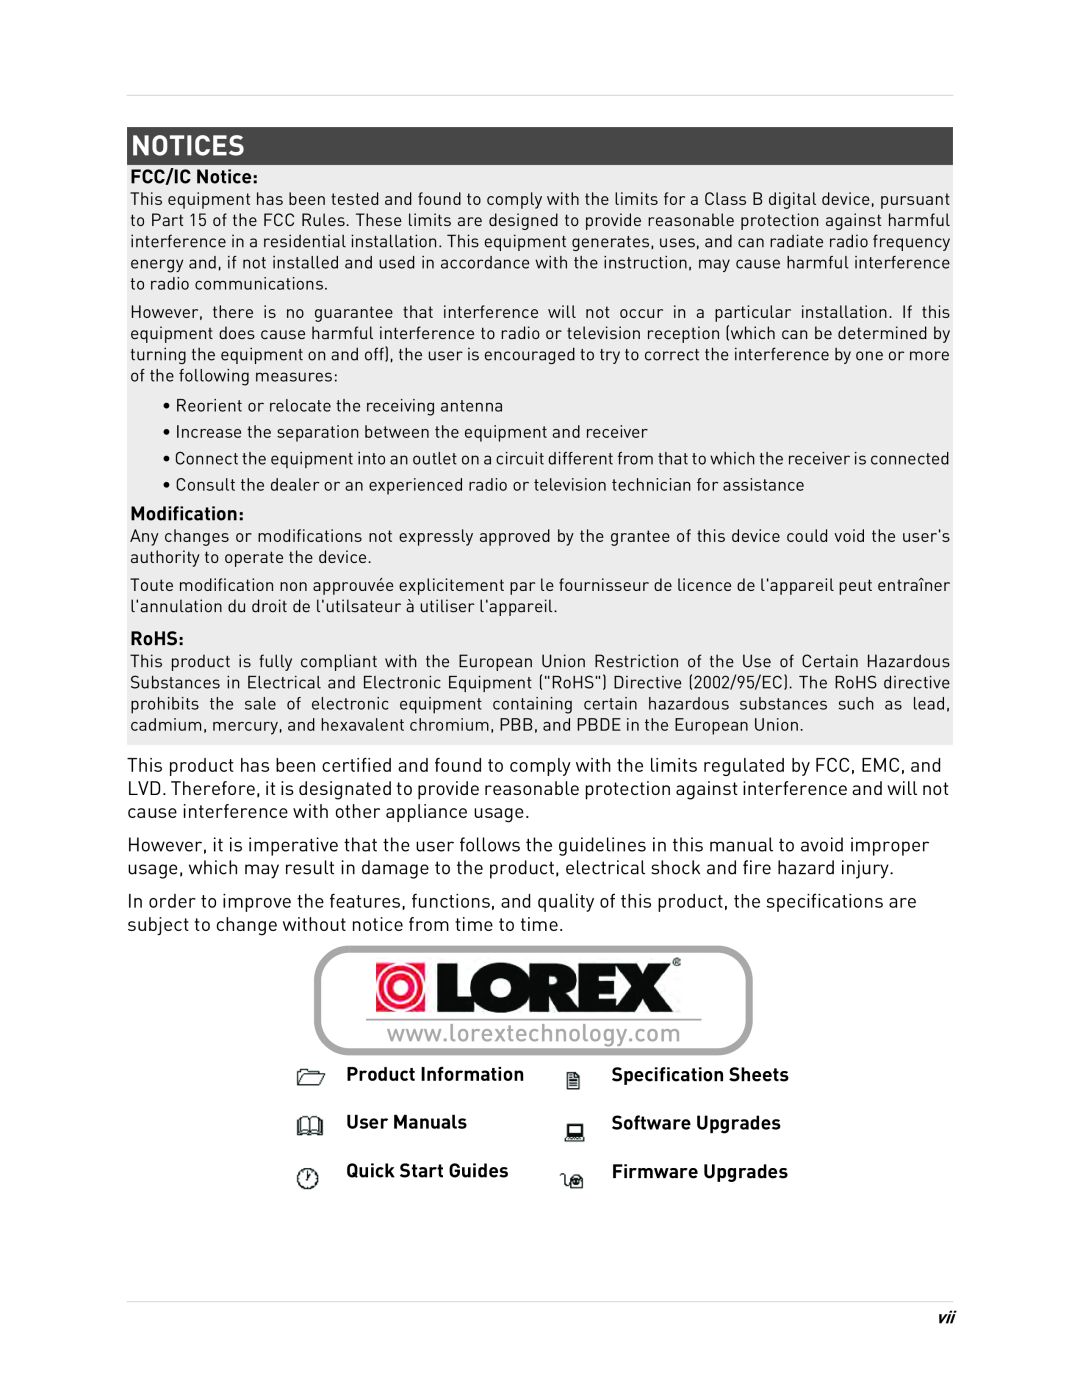 LOREX Technology LH130 Notices, FCC/IC Notice, Modification, RoHS, Product Information, User Manuals, Quick Start Guides 